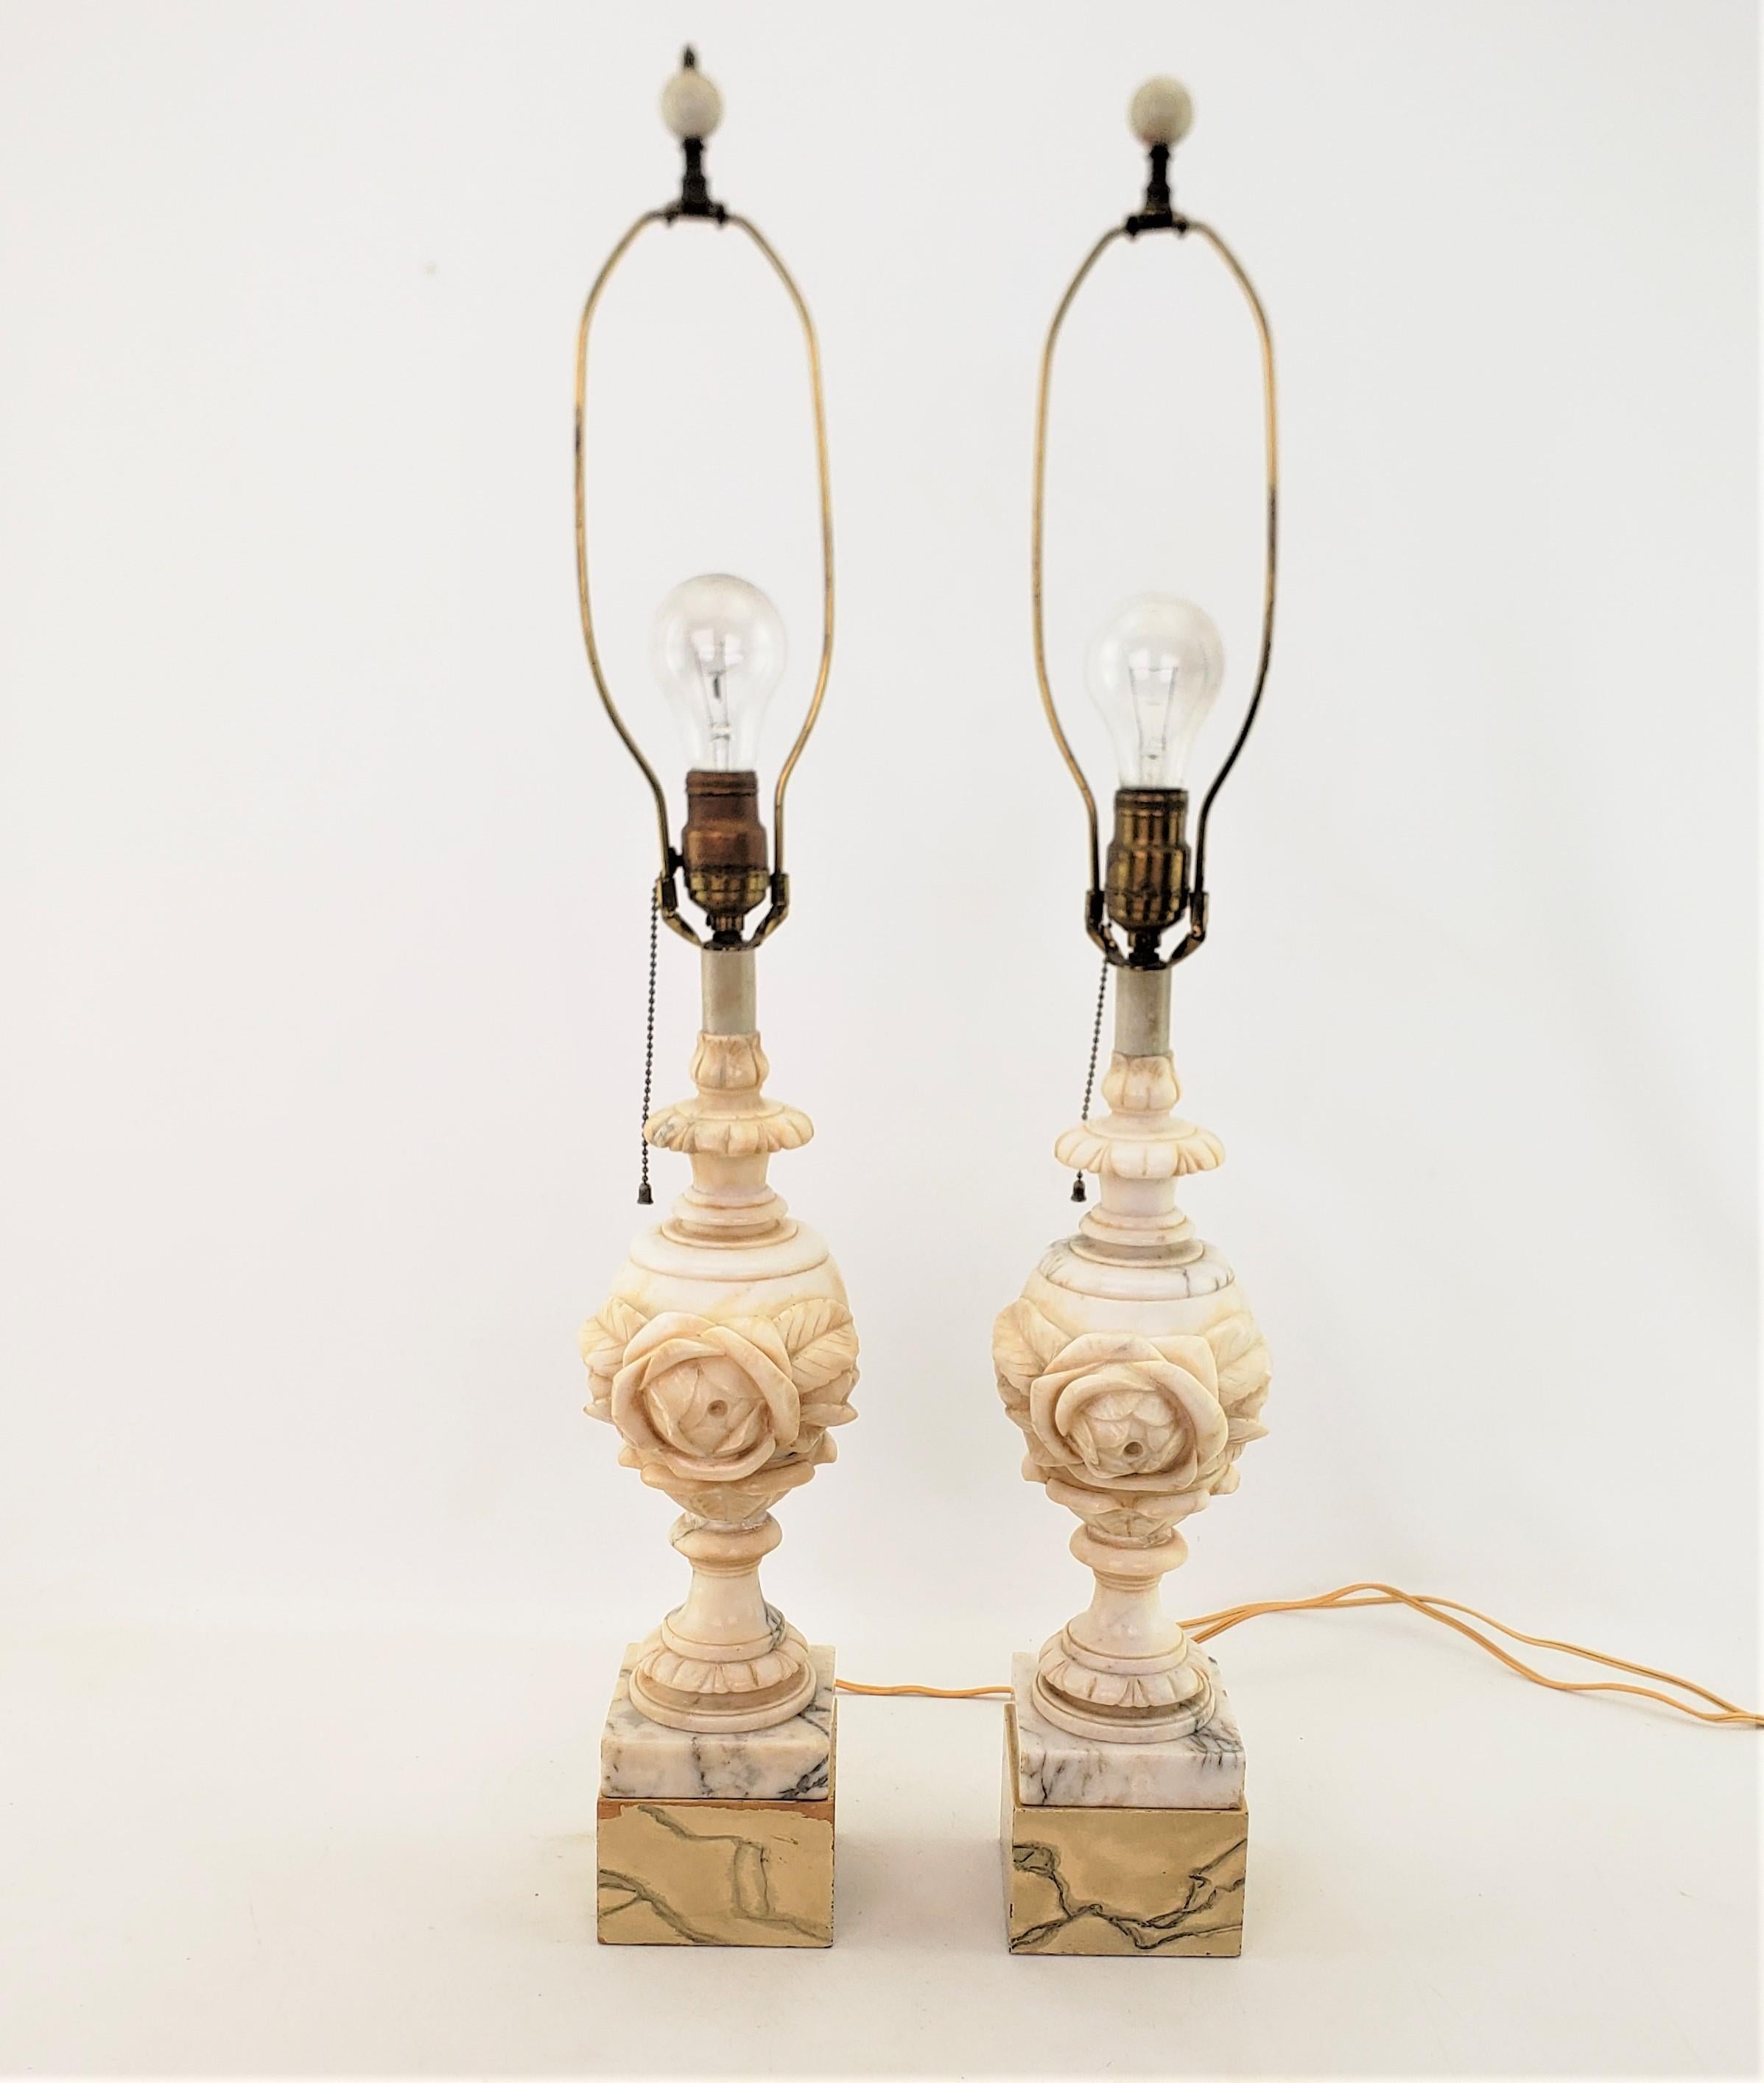 This pair of antique lamps are unsigned, but presumed to have originated from Italy and date to approximately 1920 and done in a Neoclassical Revival style. The lamps are composed of veined alabaster with added wooden block bases with a faux marble